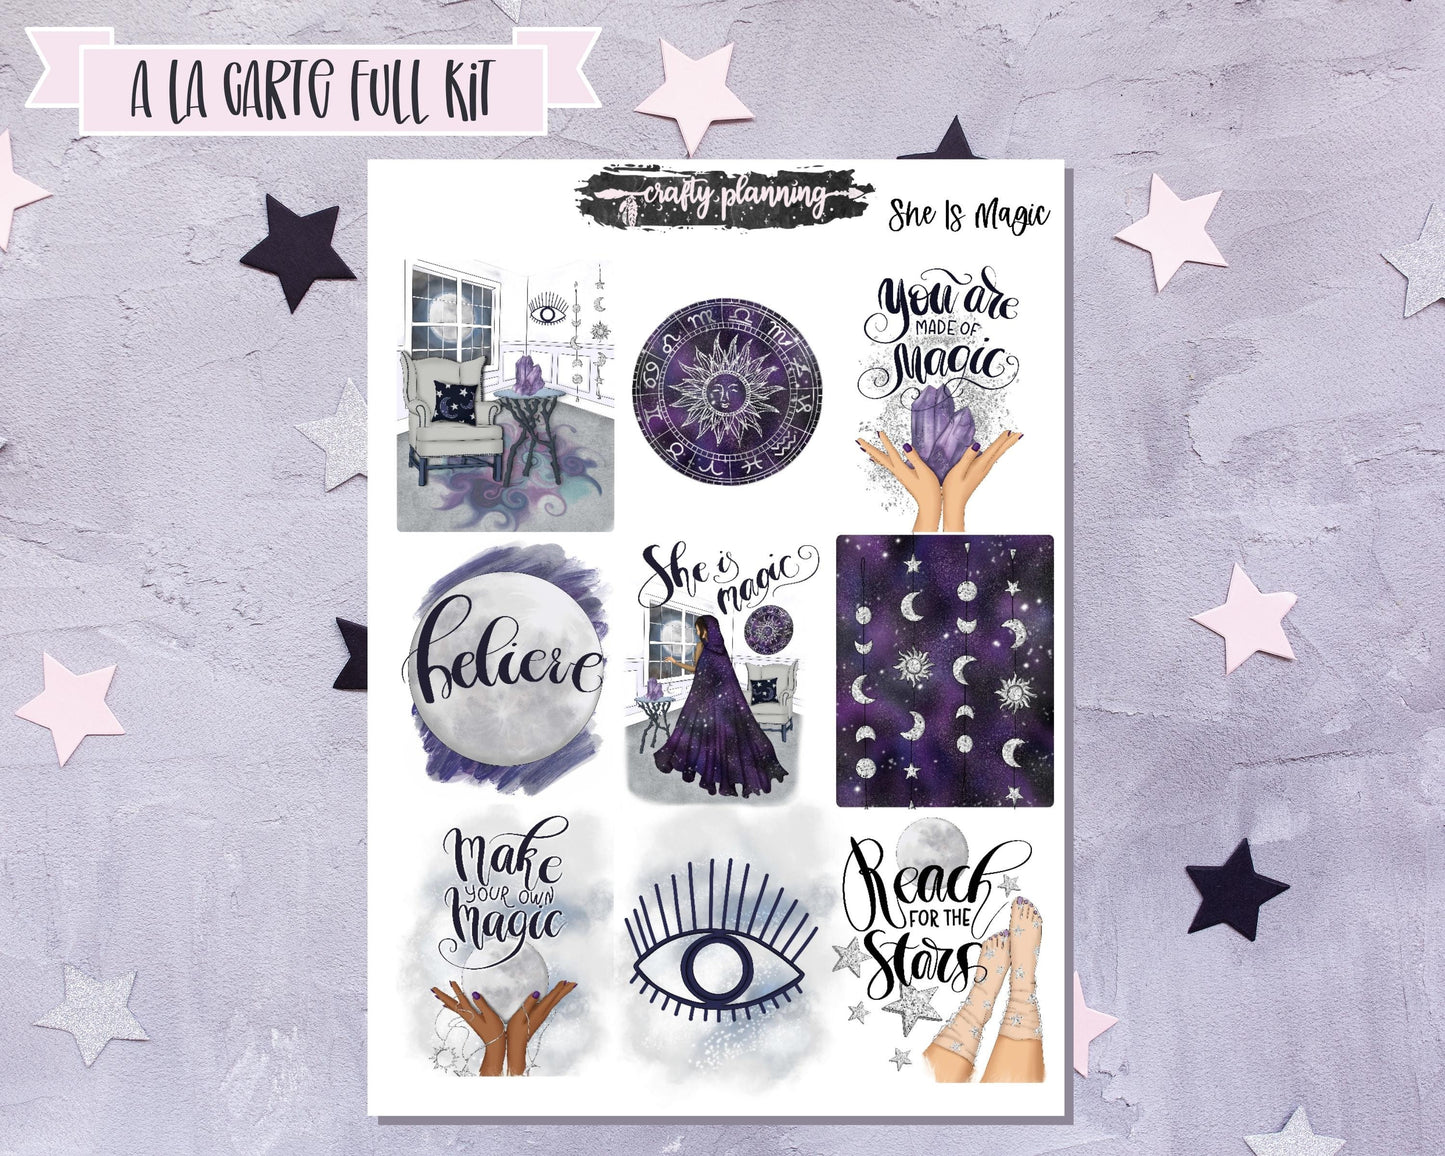 Witchcraft Stickers, Weekly Planner Kit, Witchy Stickers, Celestial Stickers, Crystal Stickers, Astrology Stickers, Esoteric Stickers